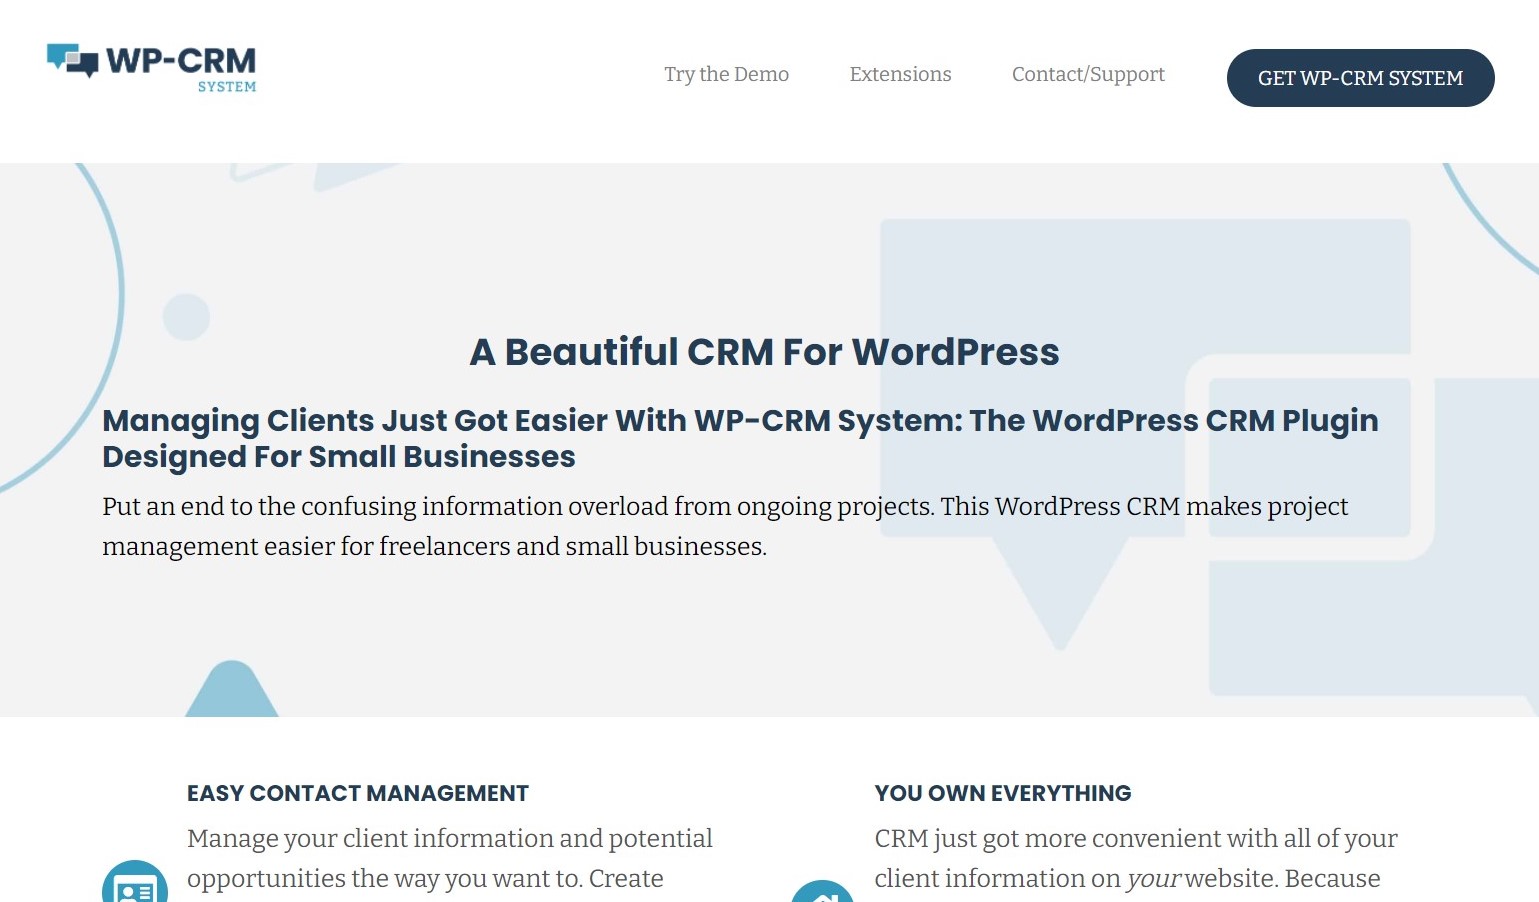 Managing Clients Just Got Easier With WP-CRM System: The WordPress CRM Plugin Designed For Small Businesses